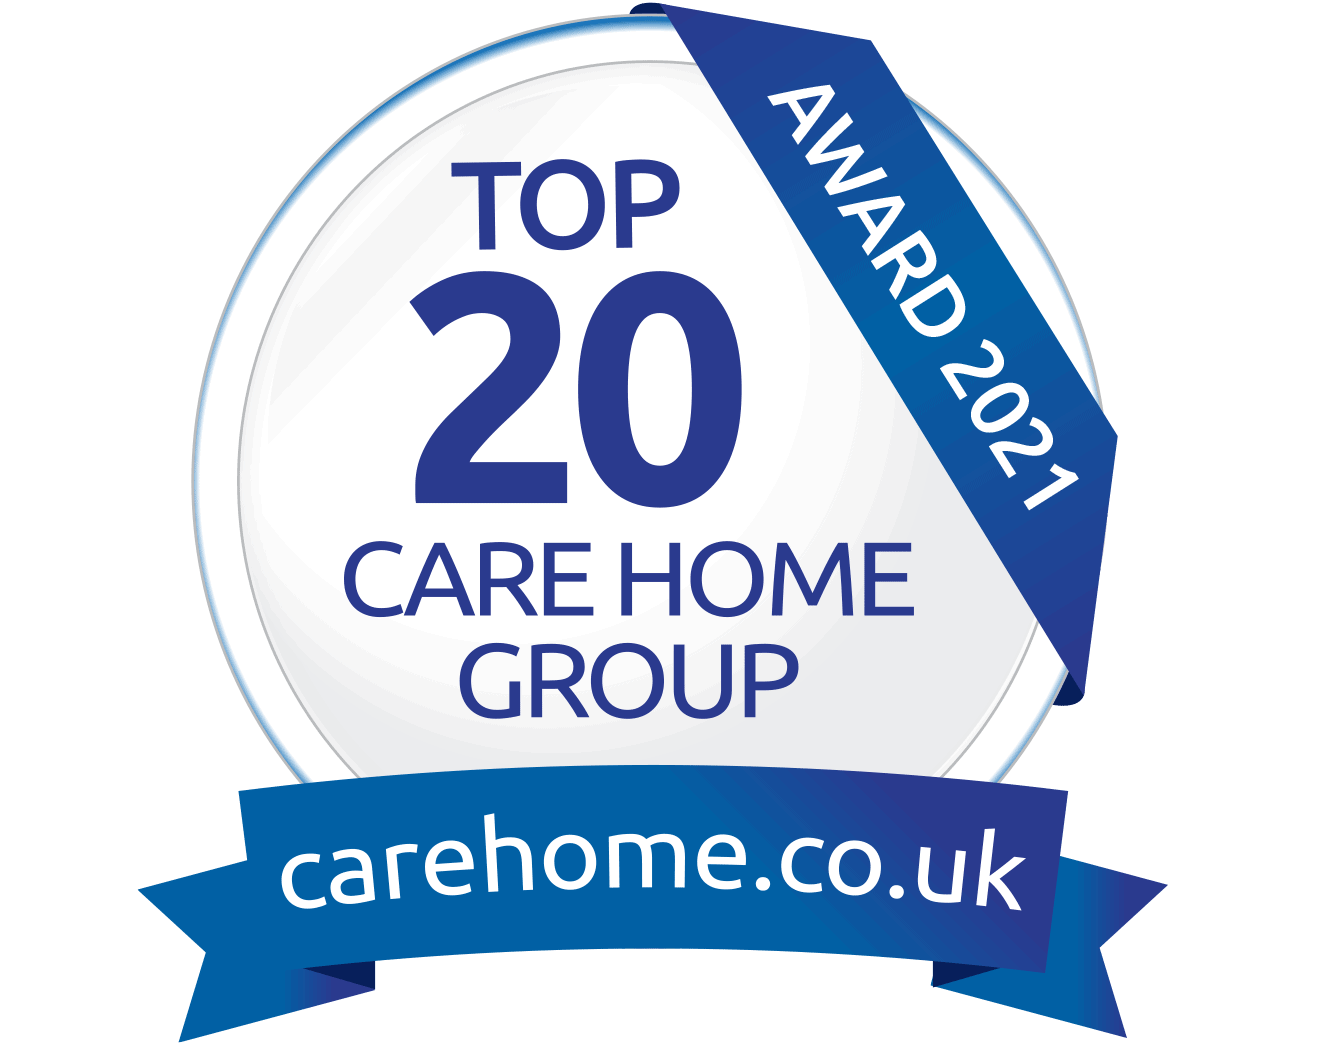 Top 20 care home group